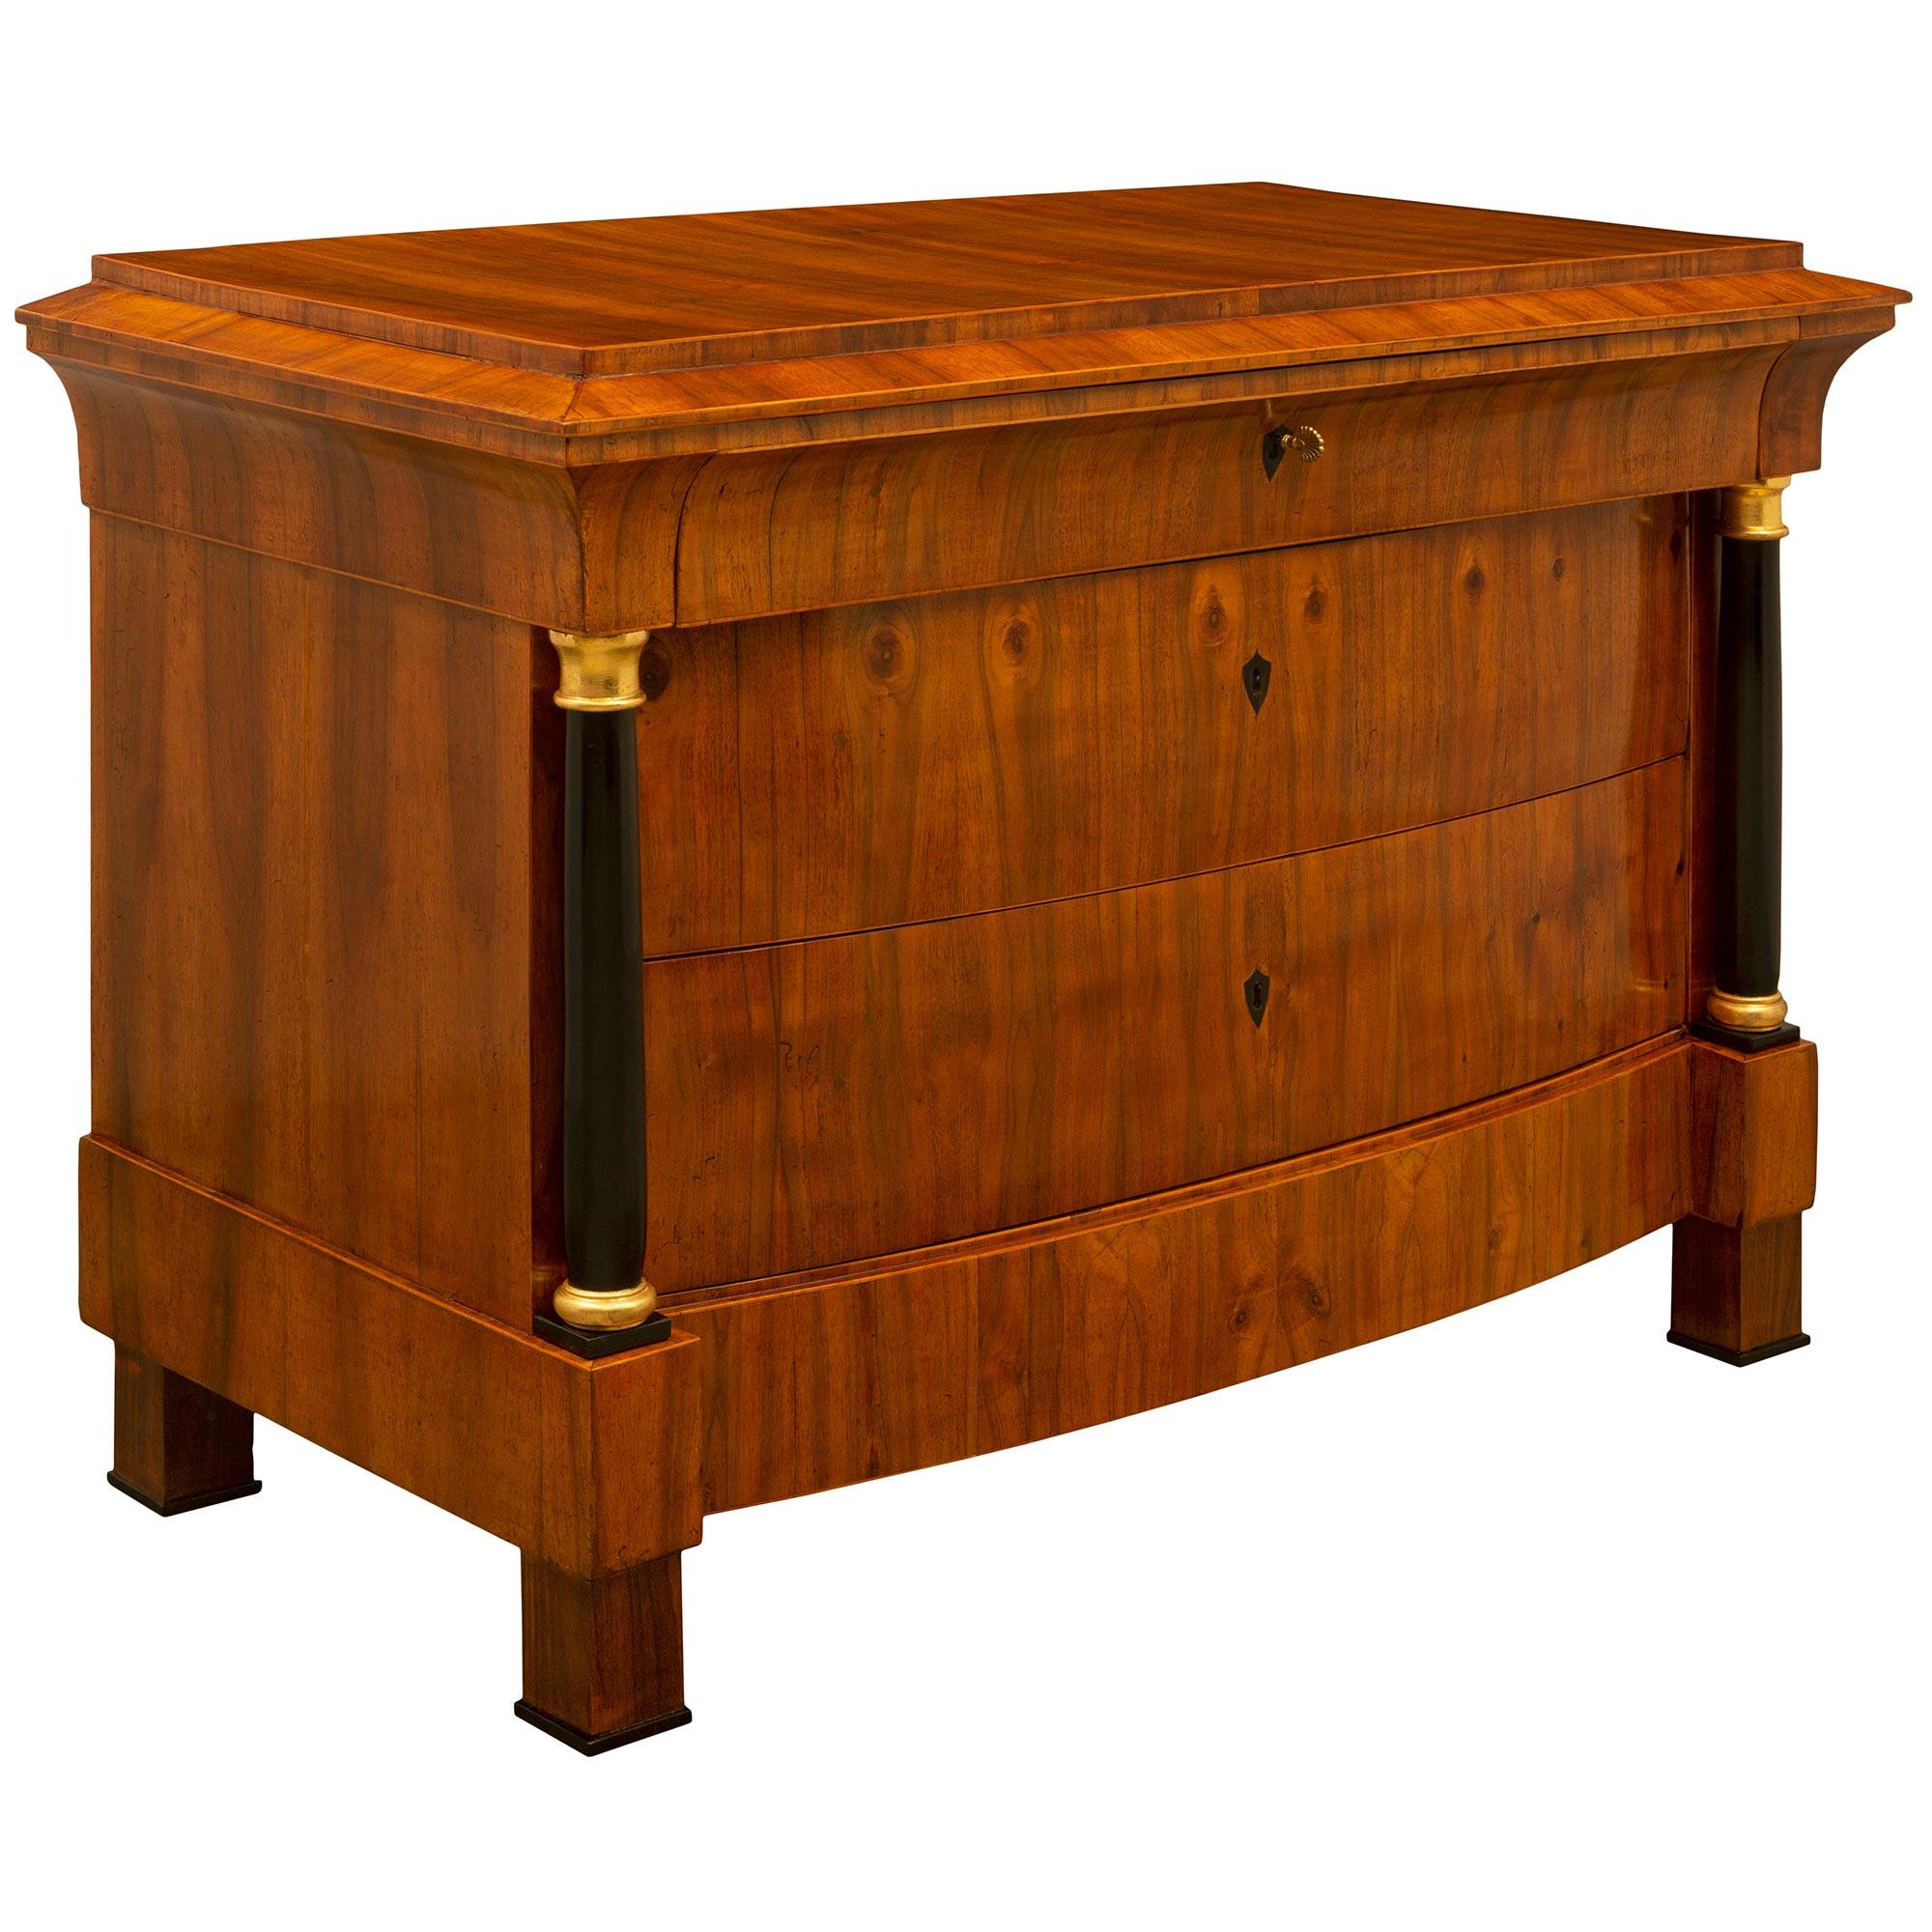 A striking and extremely unique Continental 19th century Biedermeier period Walnut, ebonized fruitwood and giltwood commode. The three drawer chest is raised by elegant block feet with delicate ebonized Fruitwood fillets below the straight frieze